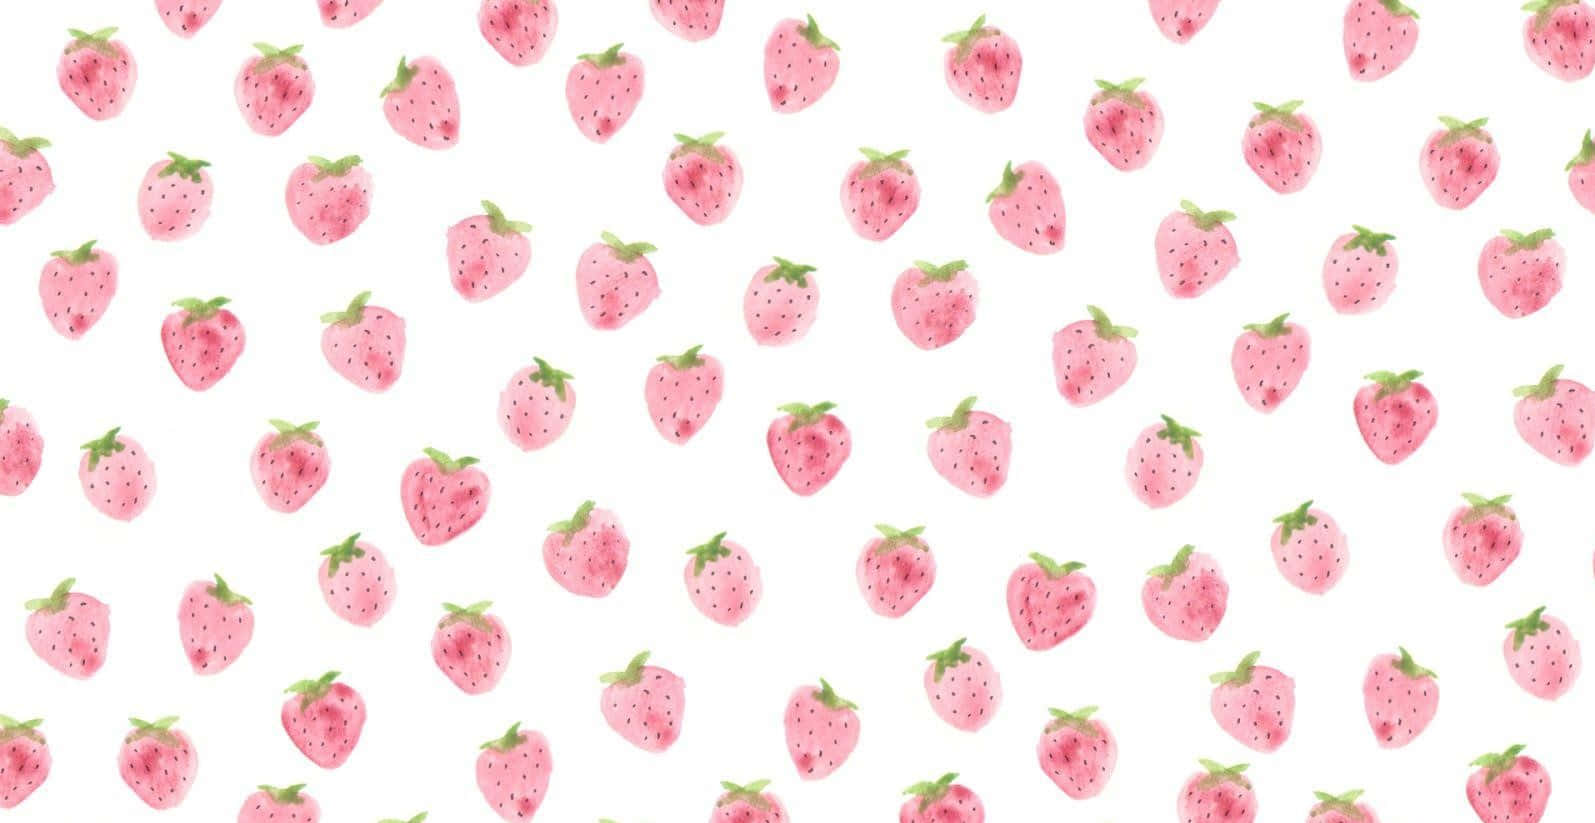 Aesthetic Pink Watercolor Strawberries Background